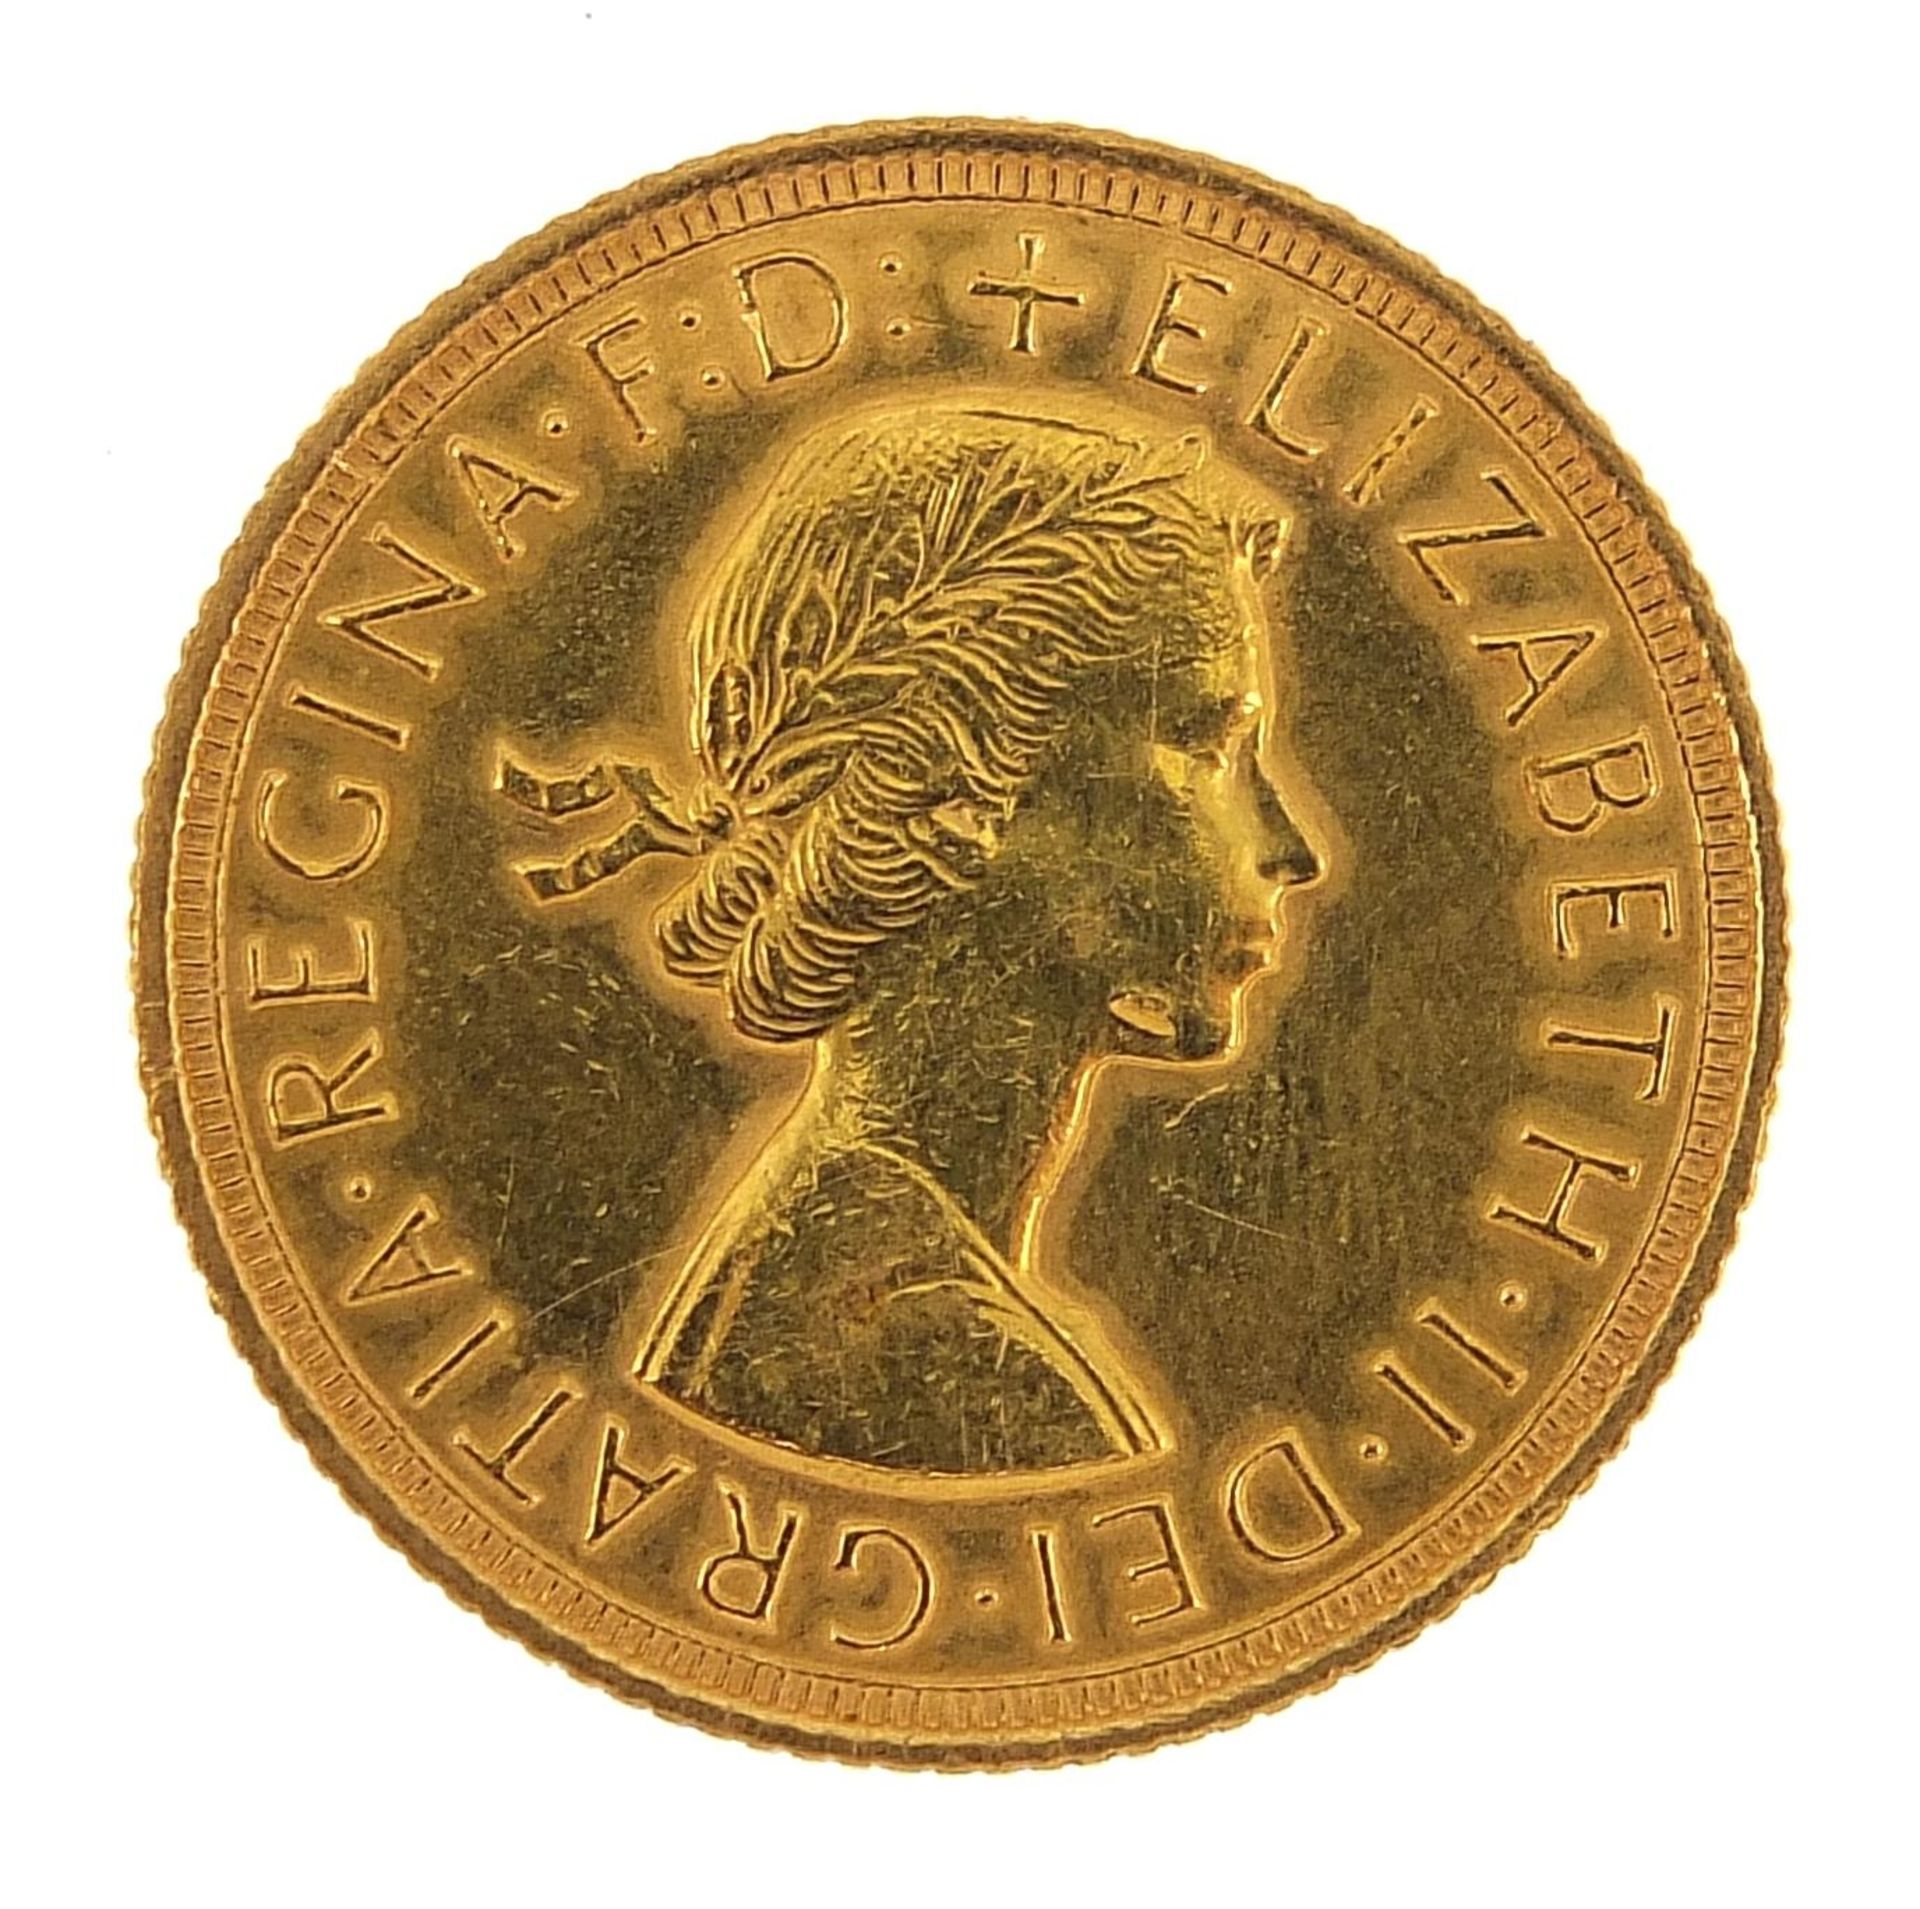 Elizabeth II 1962 gold sovereign - this lot is sold without buyer's premium - Image 2 of 3